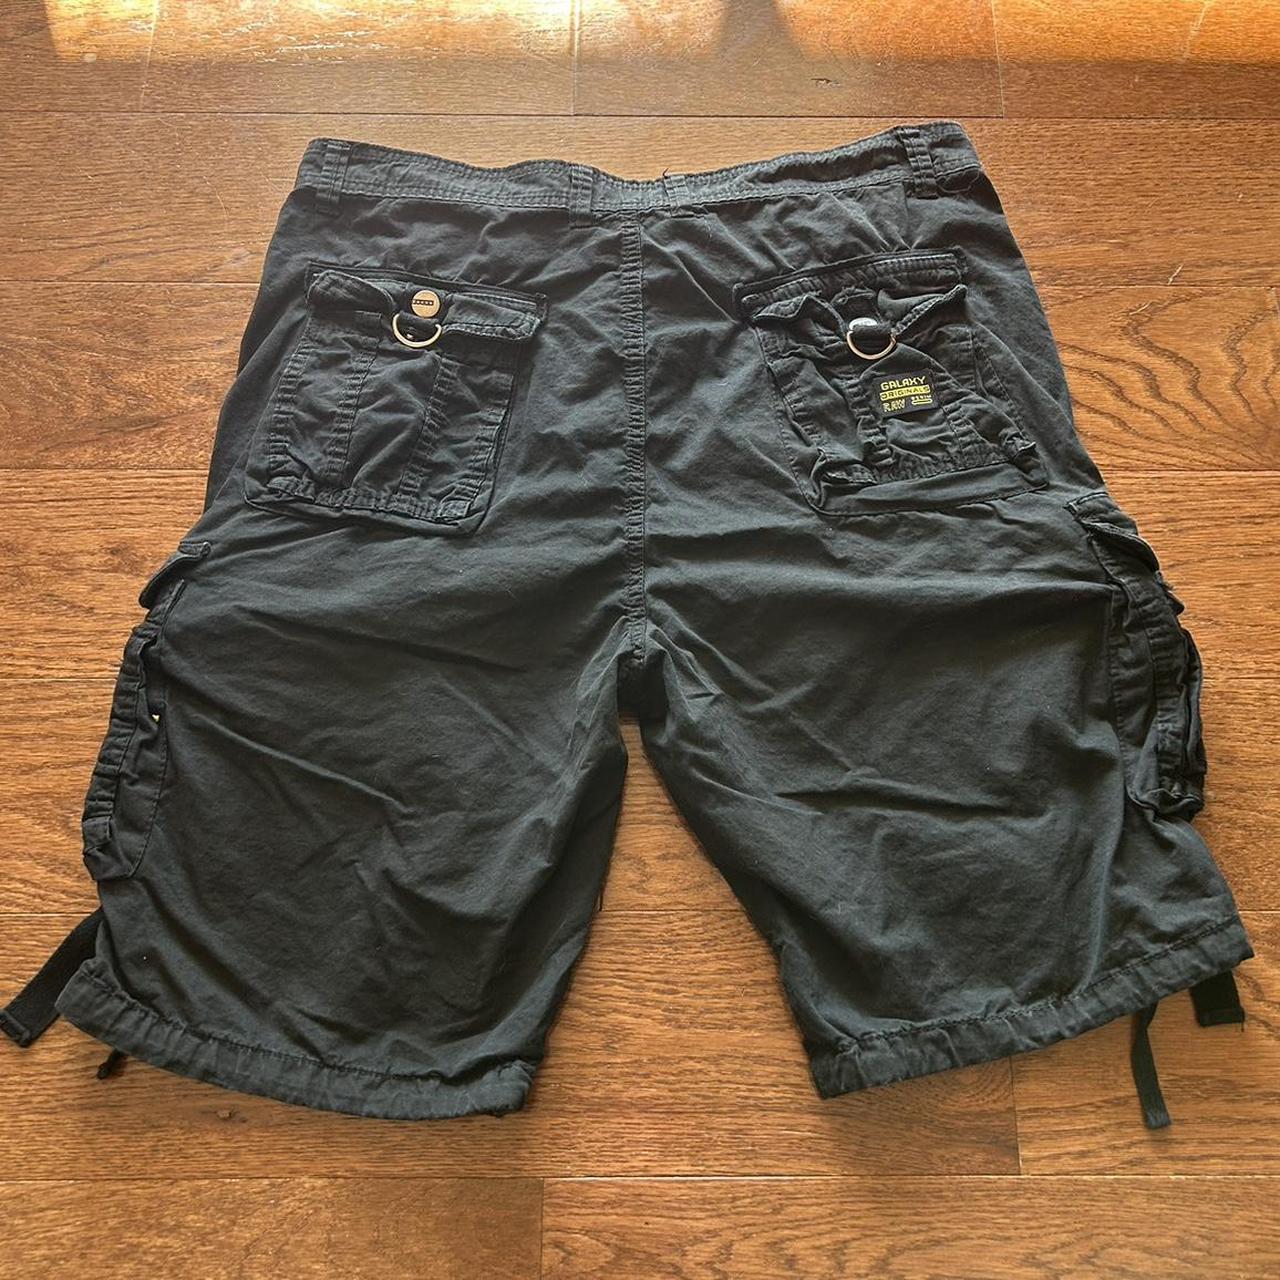 Tactical Opium Cargo Shorts -Galaxy By Harvic -6... - Depop